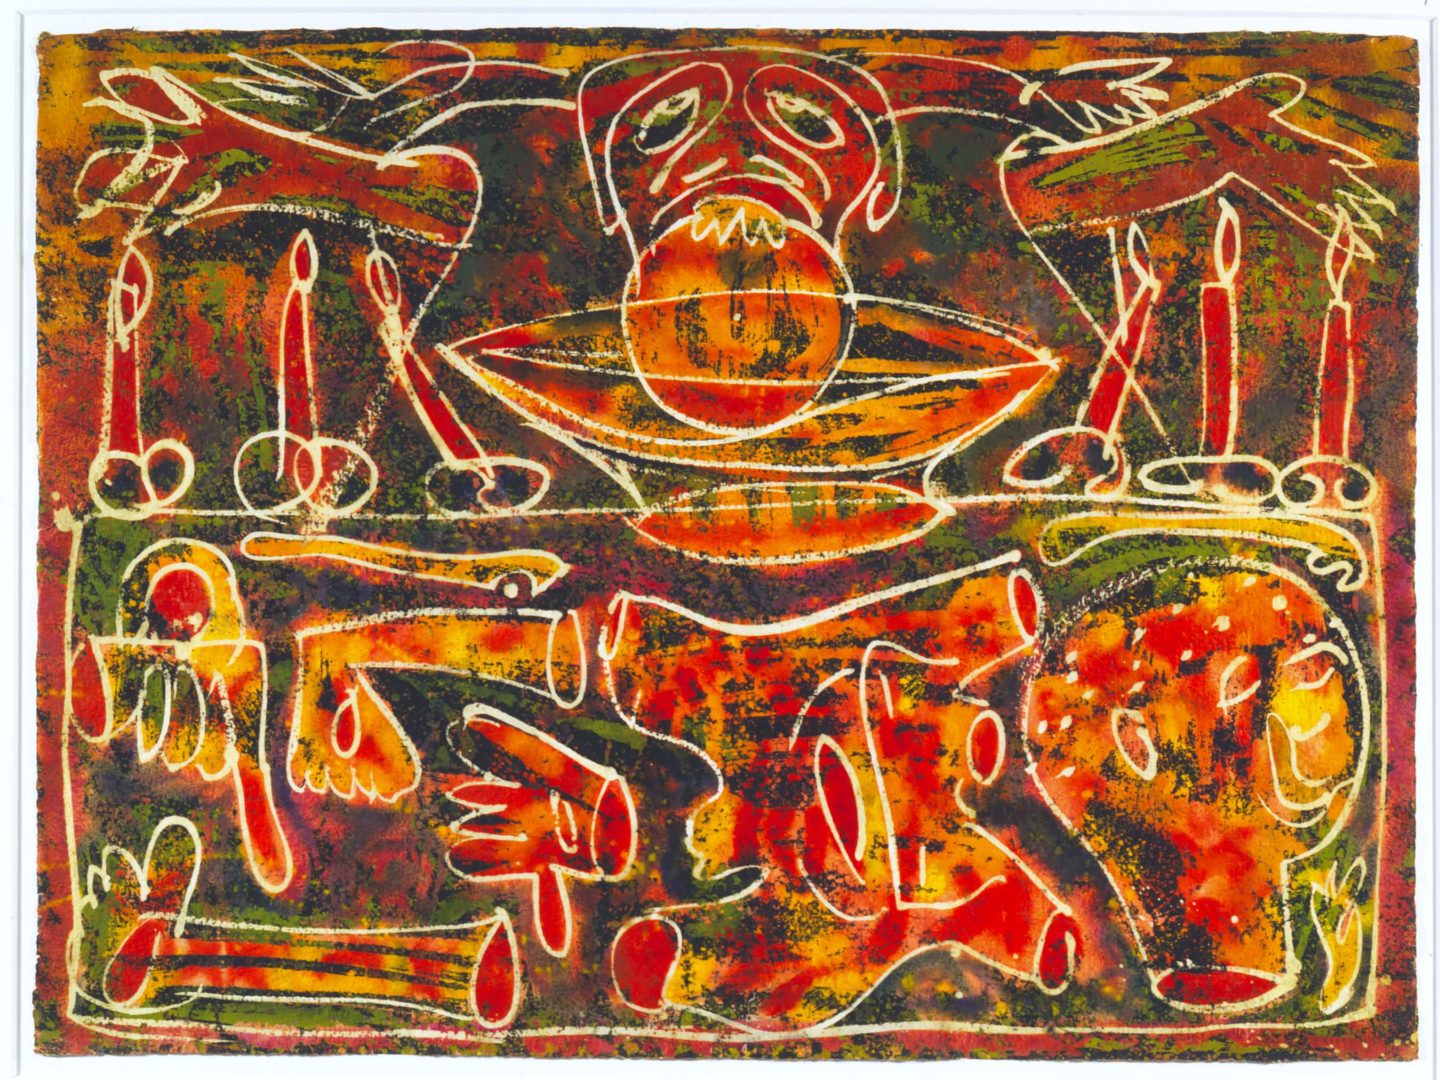 Sacrificial Meal, c. 1950 ink, wax resist, and watercolour on paper